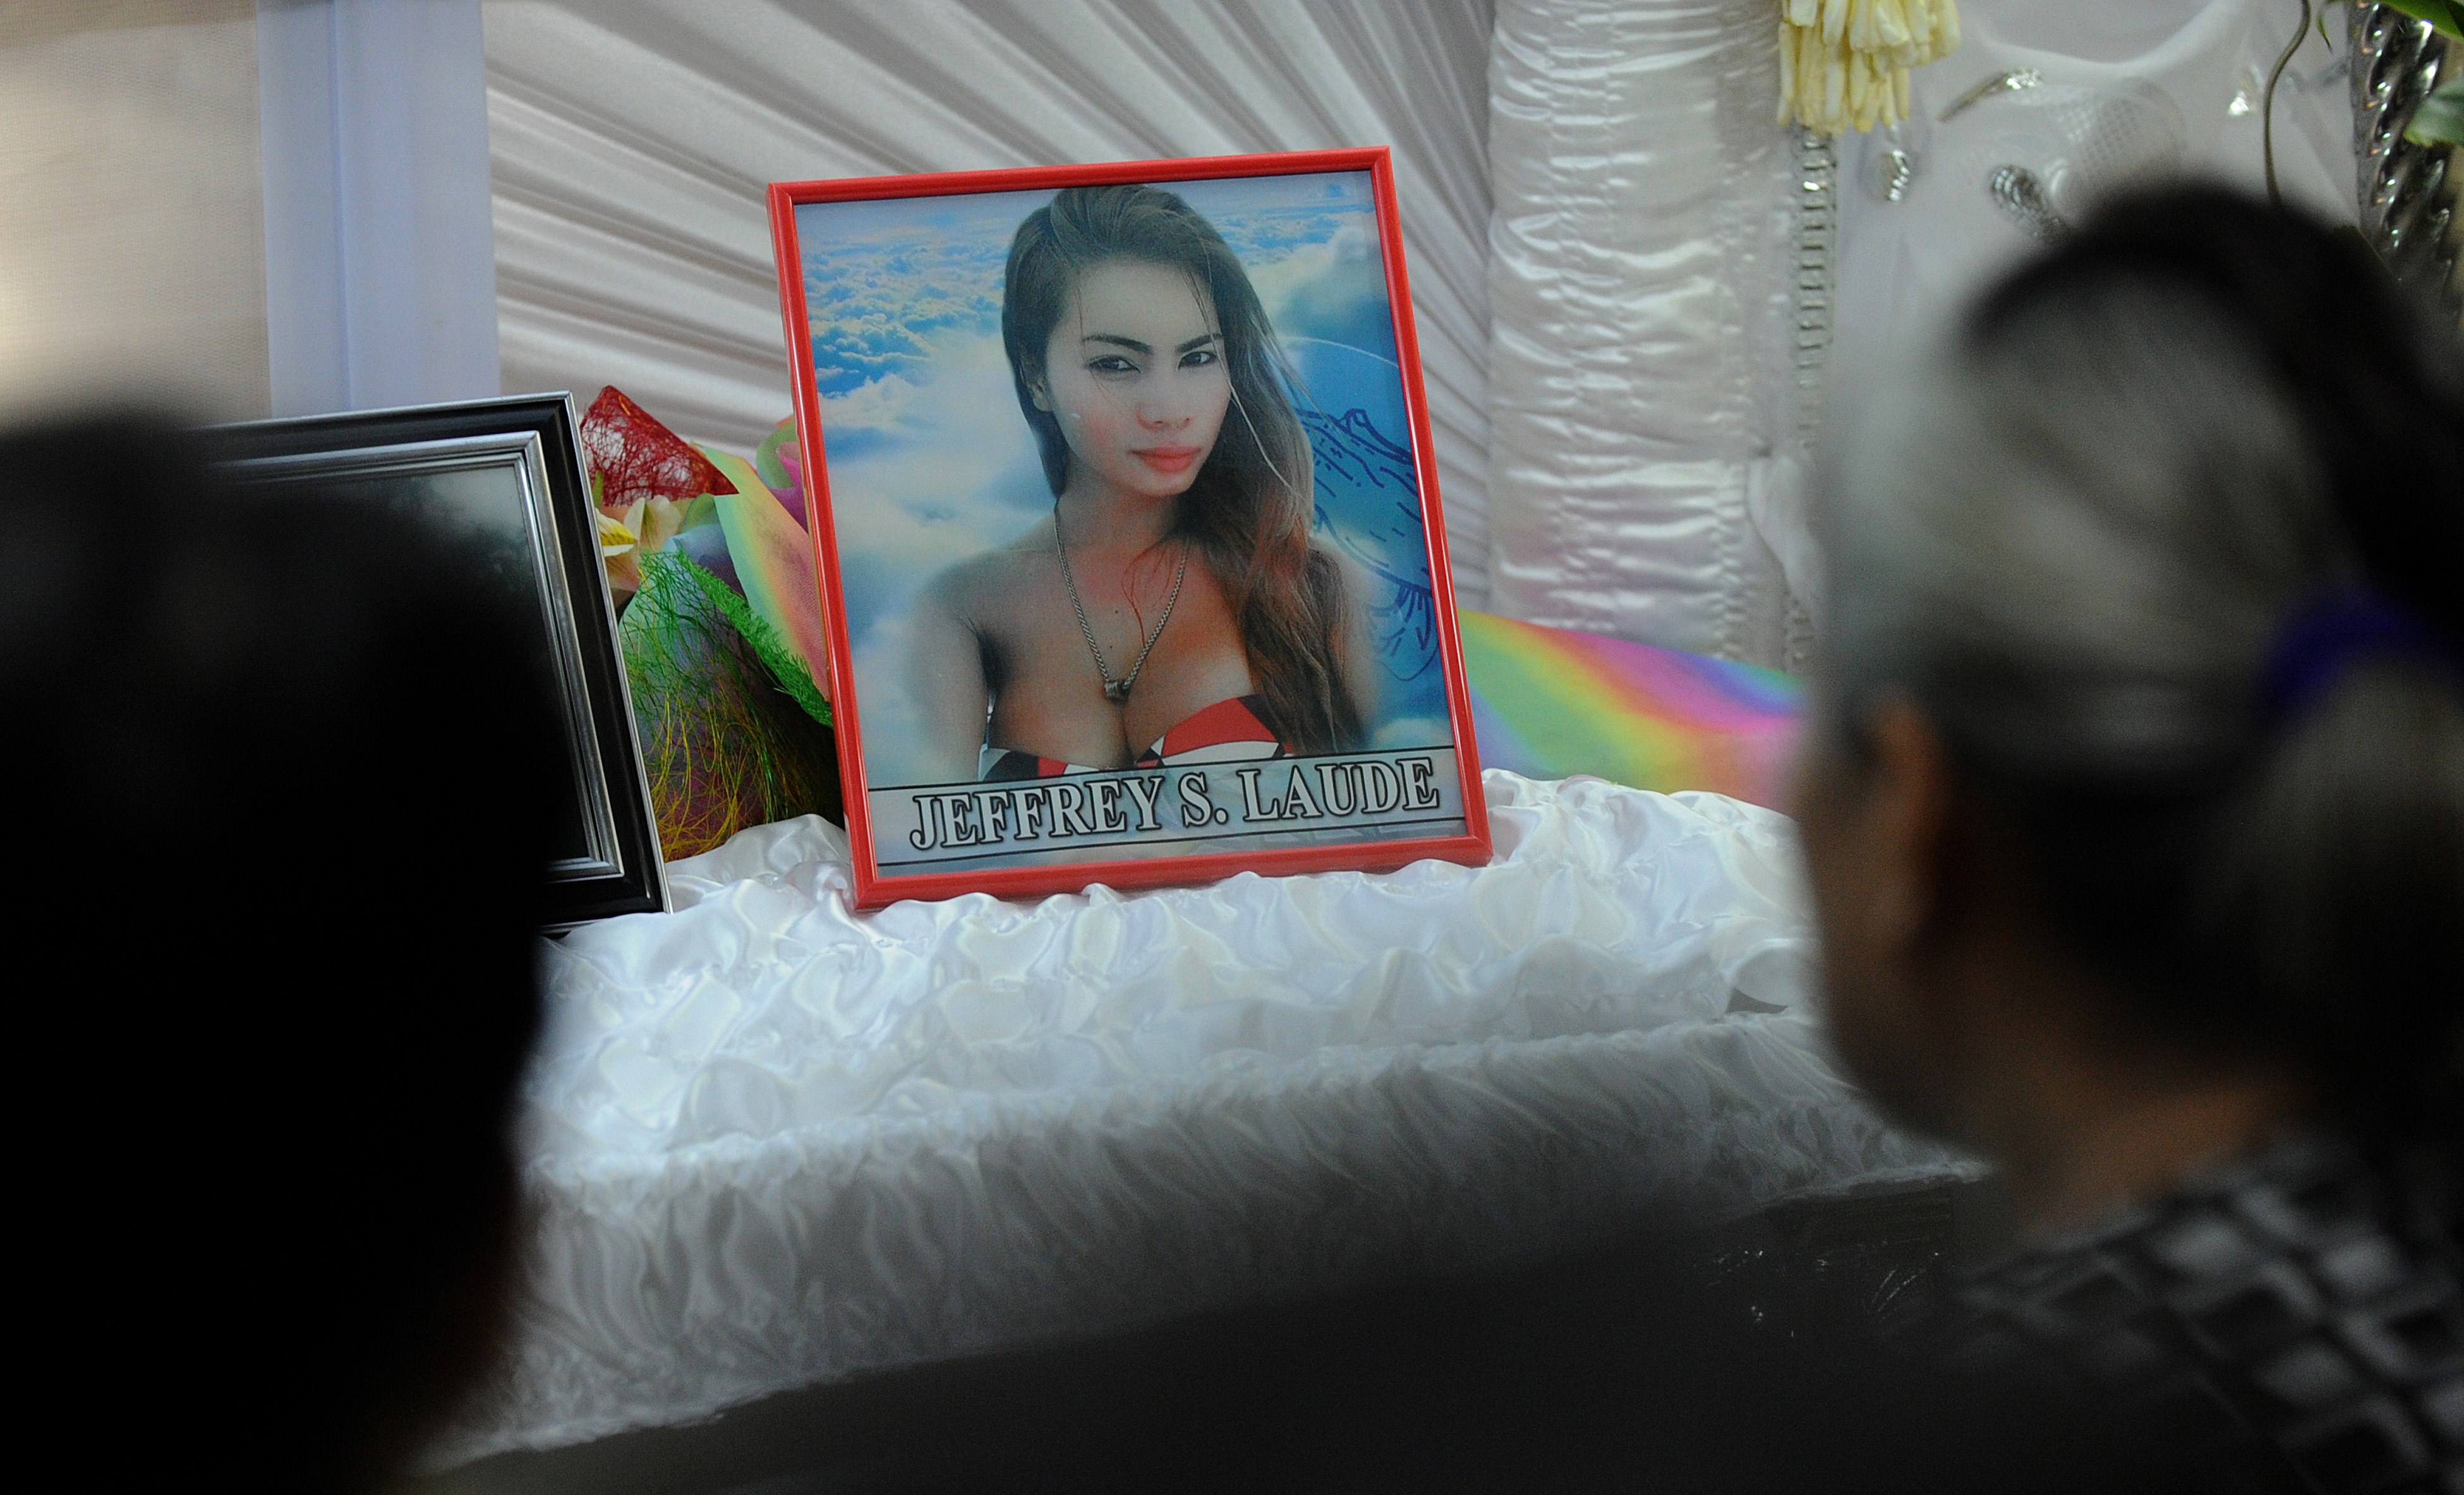 Friends and relatives of Filipino transgender resident Jeffrey Laude look on alongside her coffin and photograph in the northern Philippine city of Olongapo on Oct. 14, 2014.